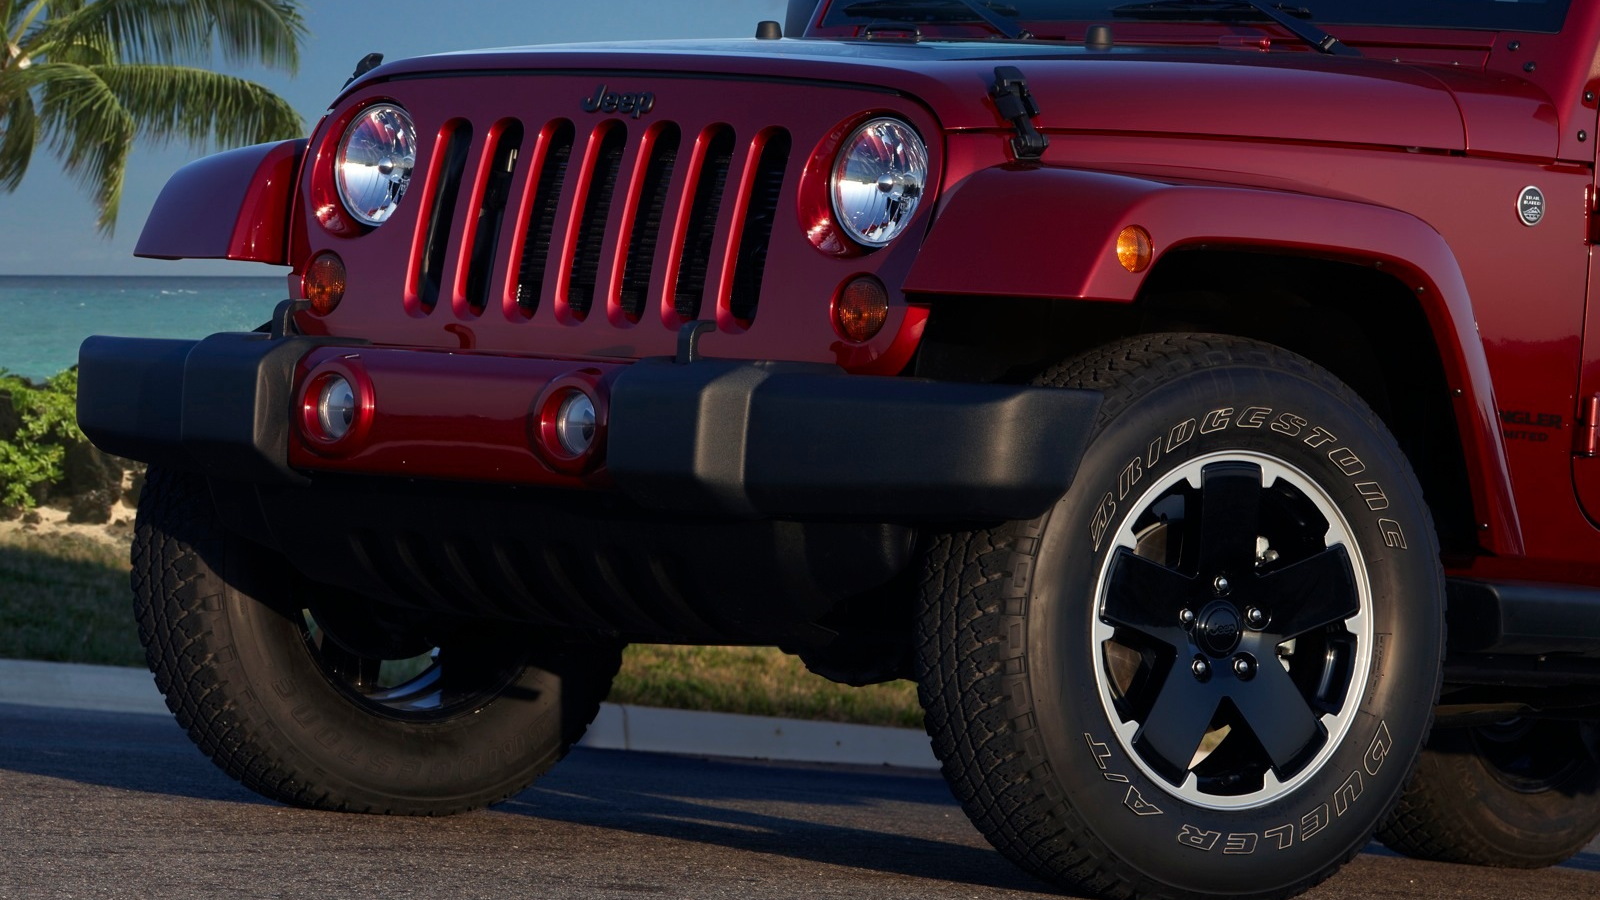 The 2012 Jeep Wrangler Unlimited Altitude Edition